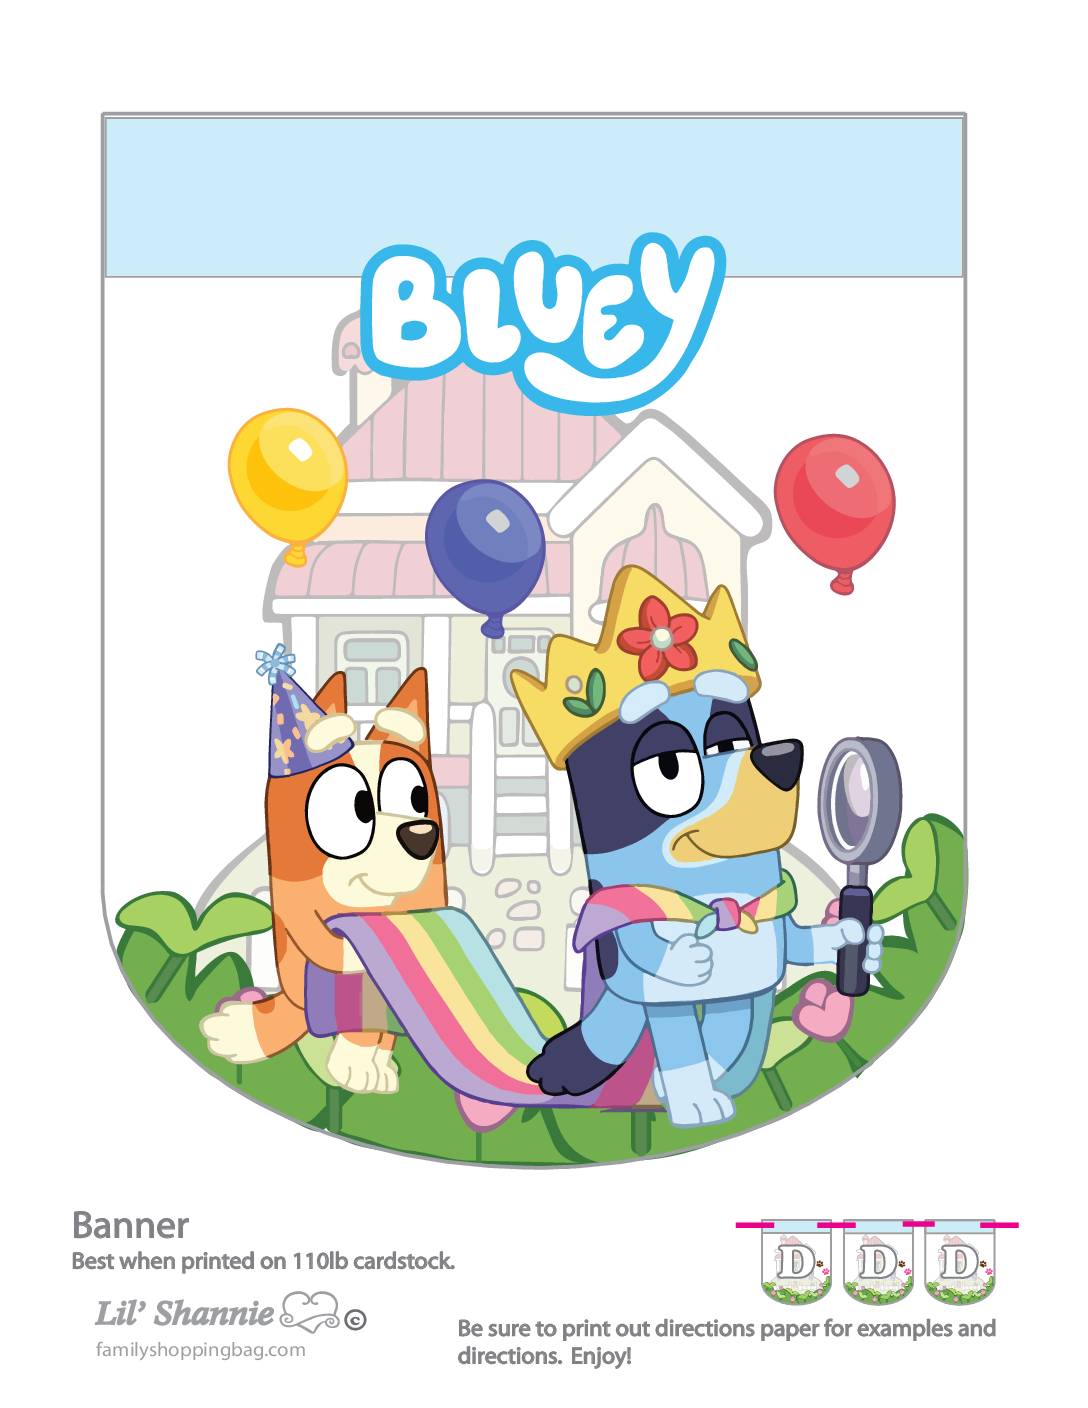 Banner Right Bluey Party Banners